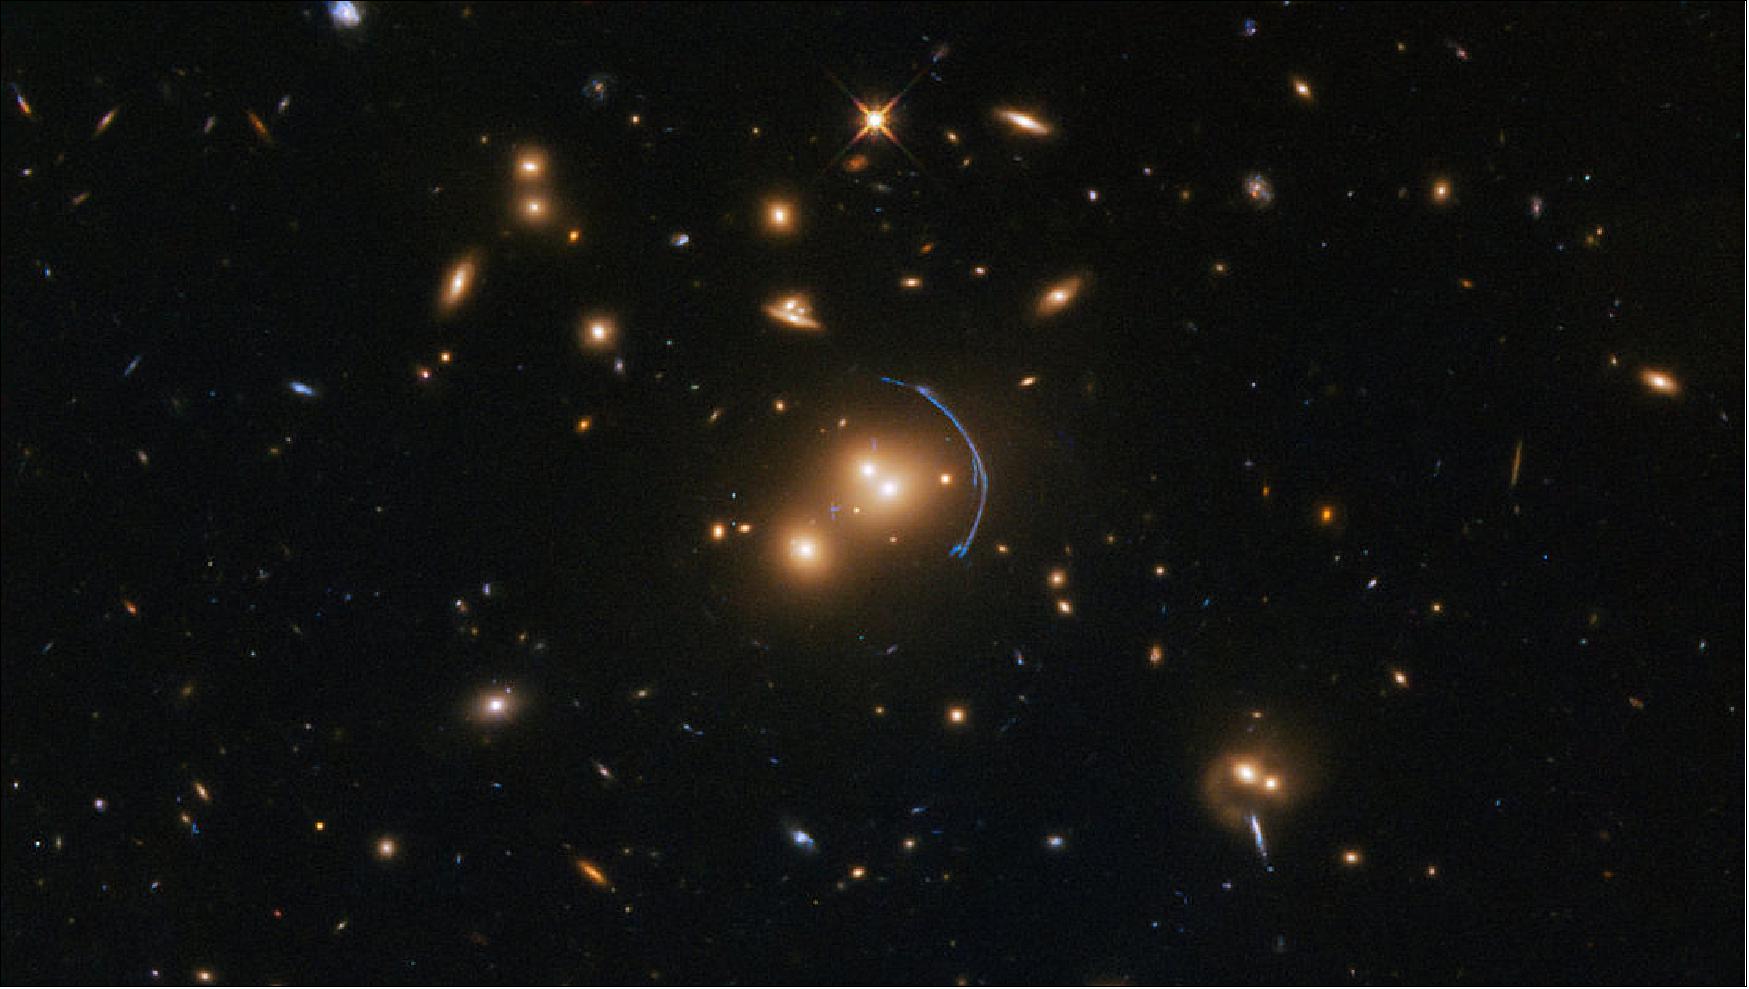 Figure 28: Obtained for a research program on star formation in old and distant galaxies, this NASA/ESA Hubble Space Telescope image obtained with its Wide Field Camera 3 (WFC3) demonstrates the immense effects of gravity; more specifically, it shows the effects of gravitational lensing caused by an object called SDSS J1152+3313 (image credit: ESA/Hubble & NASA: Acknowledgement: Judy Schmidt (Geckzilla), CC BY 4.0)